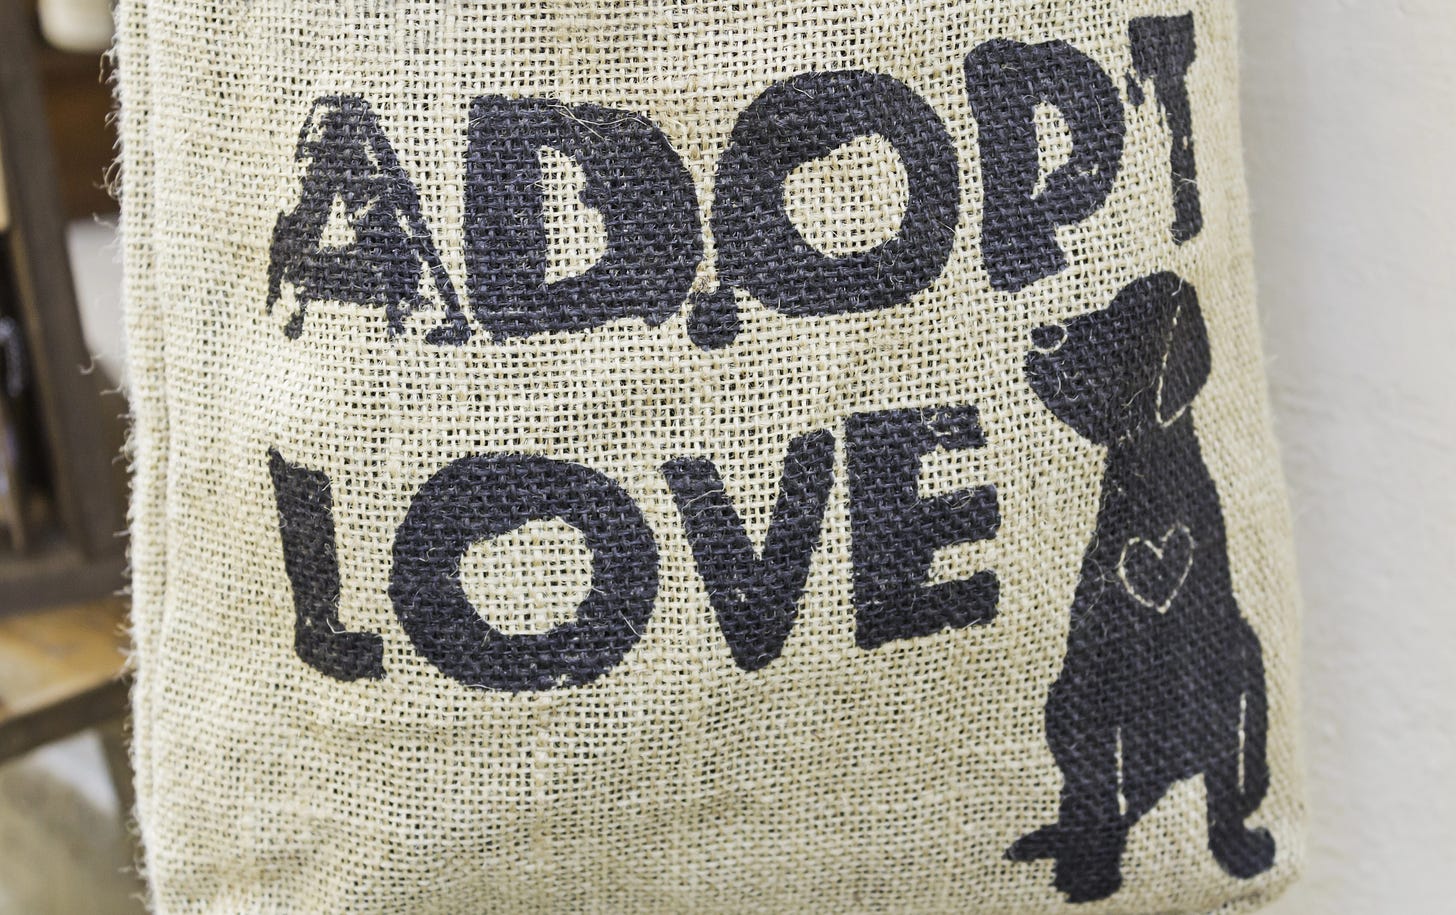 Adopting saves lives and supports ethical treatment of animals. By choosing adoption over shopping, we give deserving animals a second chance and reduce demand for breeding practices that contribute to pet overpopulation.